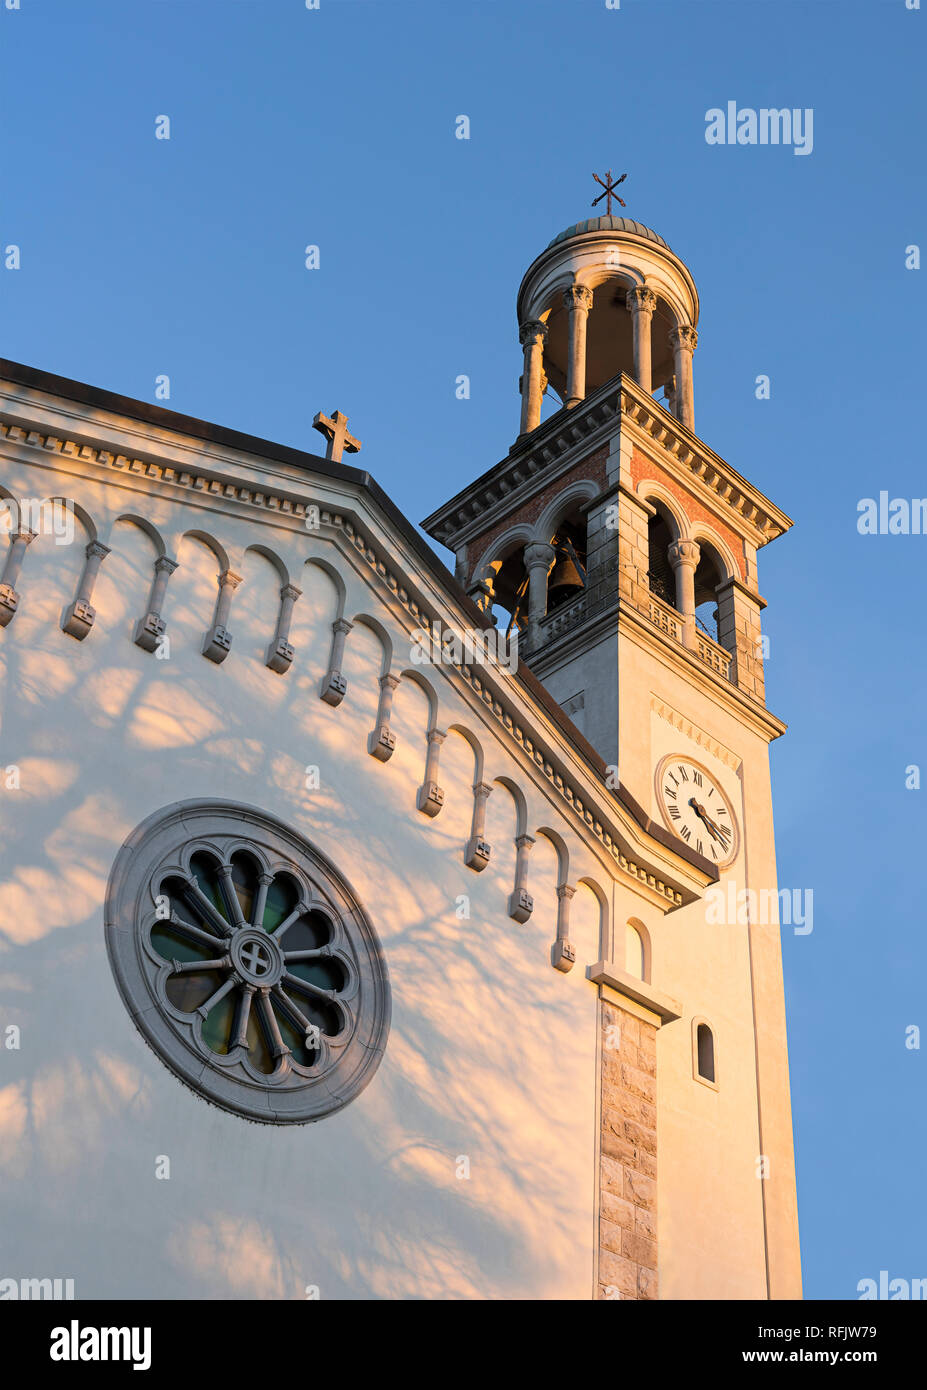 Catolic church with a small dome on top. Stock Photo